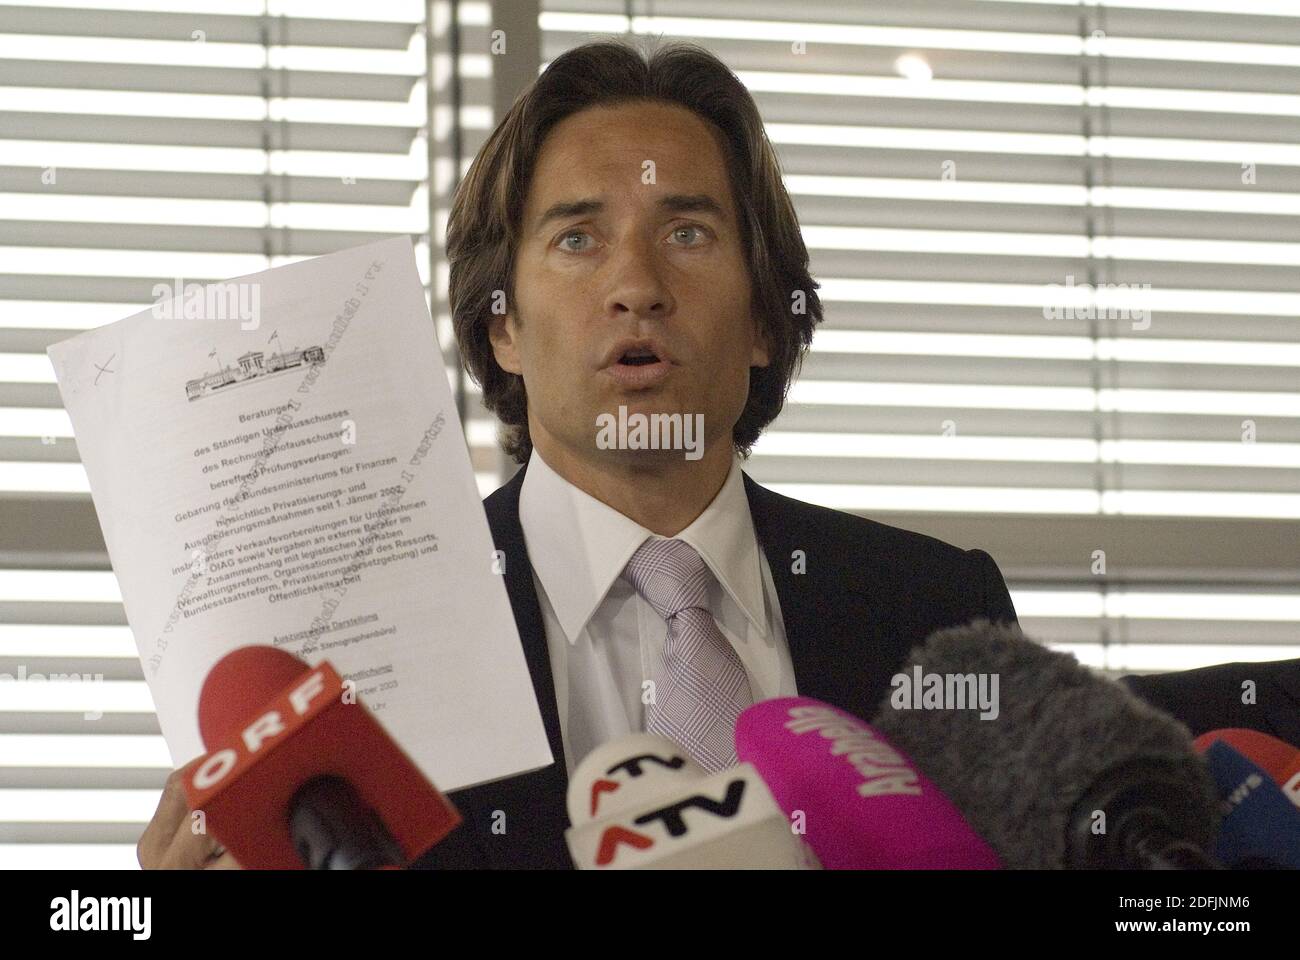 Archive picture from 3rd May, 2010. Former Finance Minister Karl Heinz Grasser was sentenced to 8 years in prison on December 4th, 2020. Picture shows Karl Heinz Grasser at a press conference when he was already accused. Stock Photo